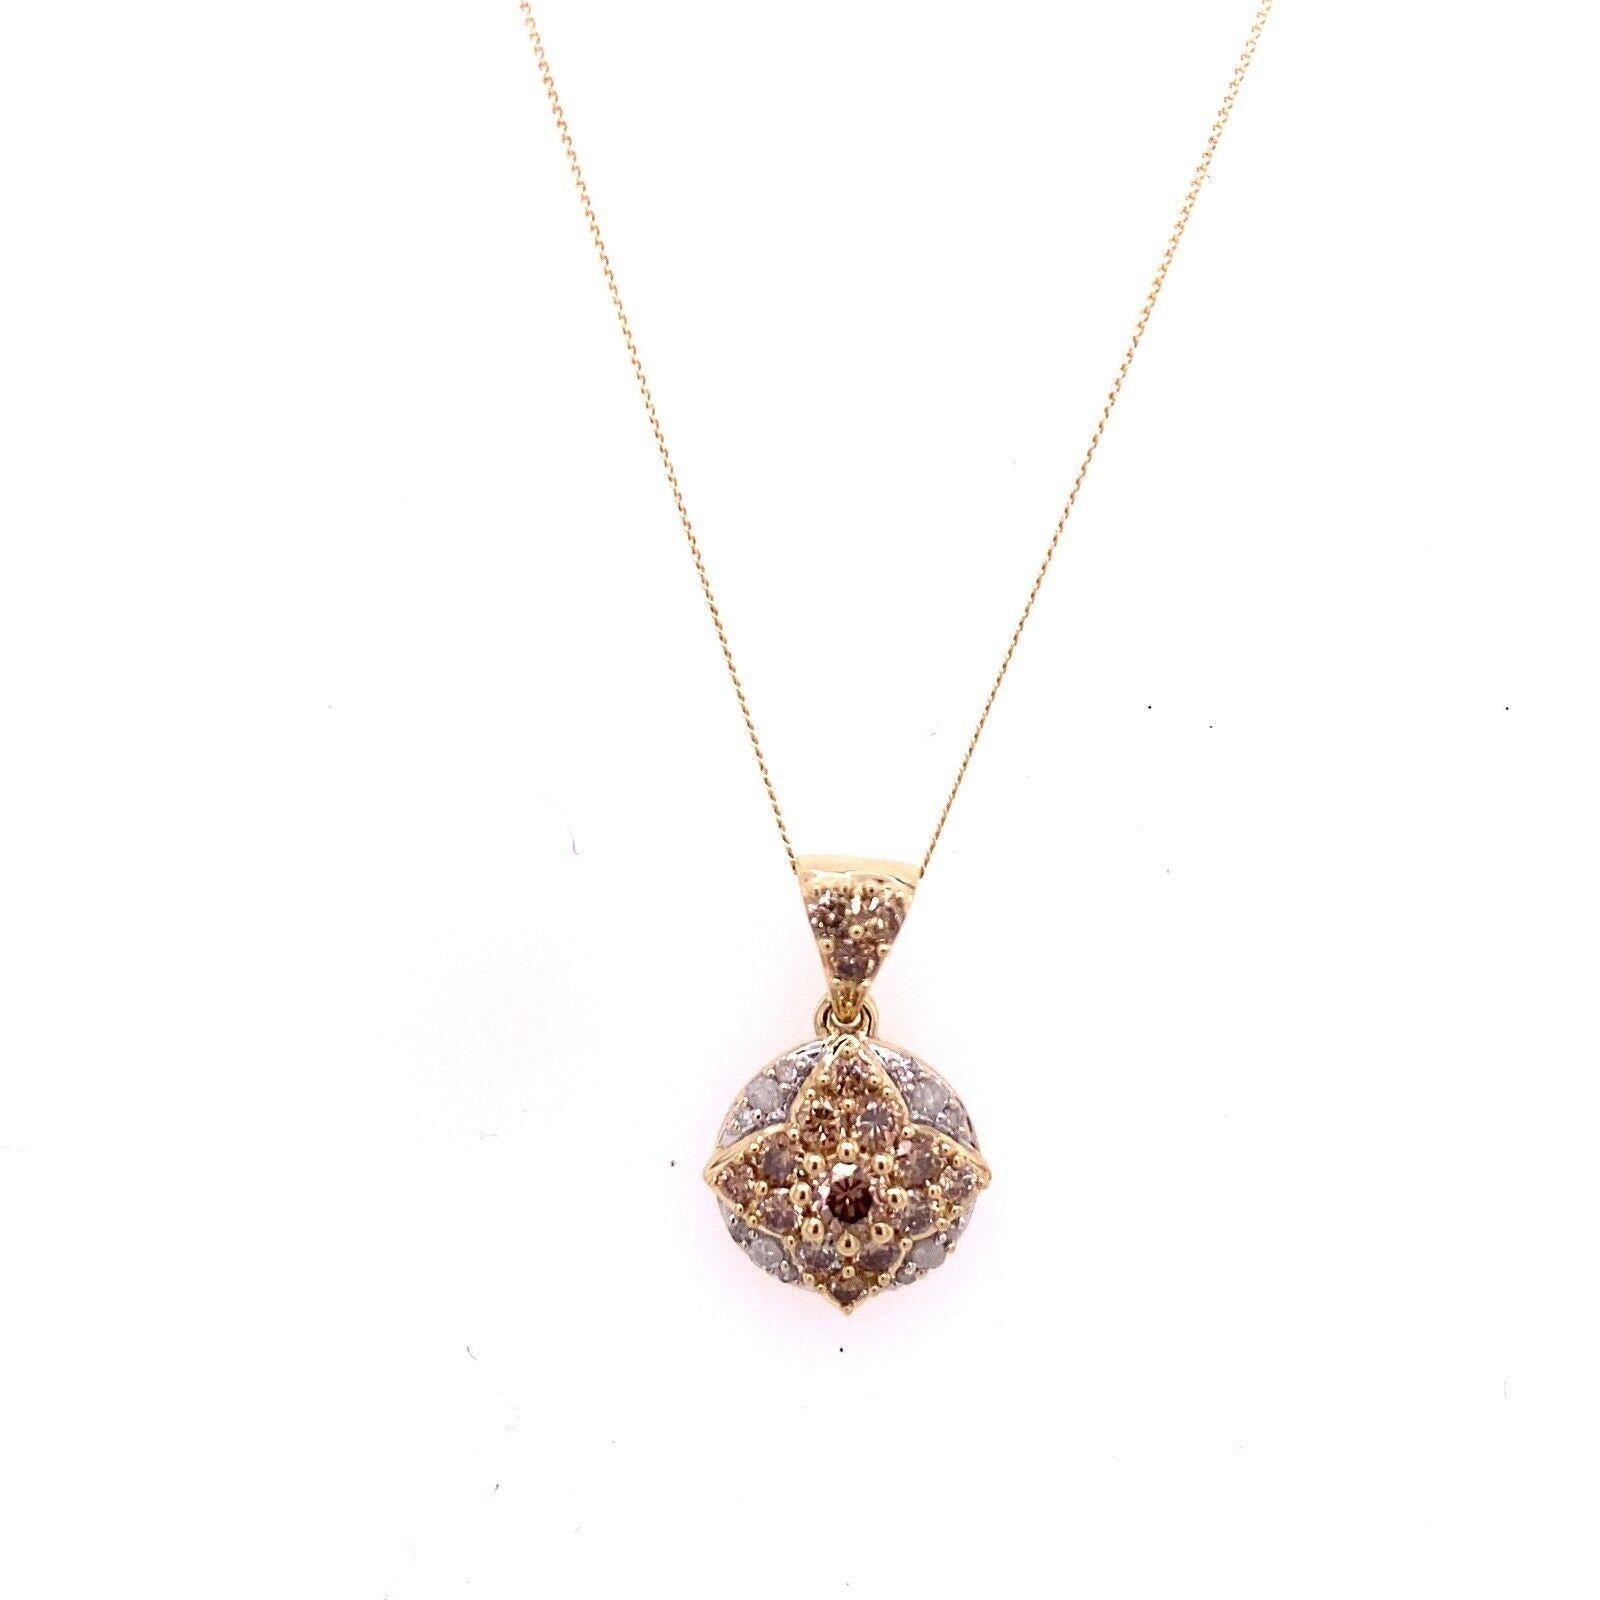 This pendant in 9ct yellow gold features 0.75ct champagne & white diamonds set in four rows to create a unique pattern.
The pendant hangs from a delicate 9ct yellow gold chain.

Additional Information:
Total Diamond Weight: 0.75ct
Diamond Colour: